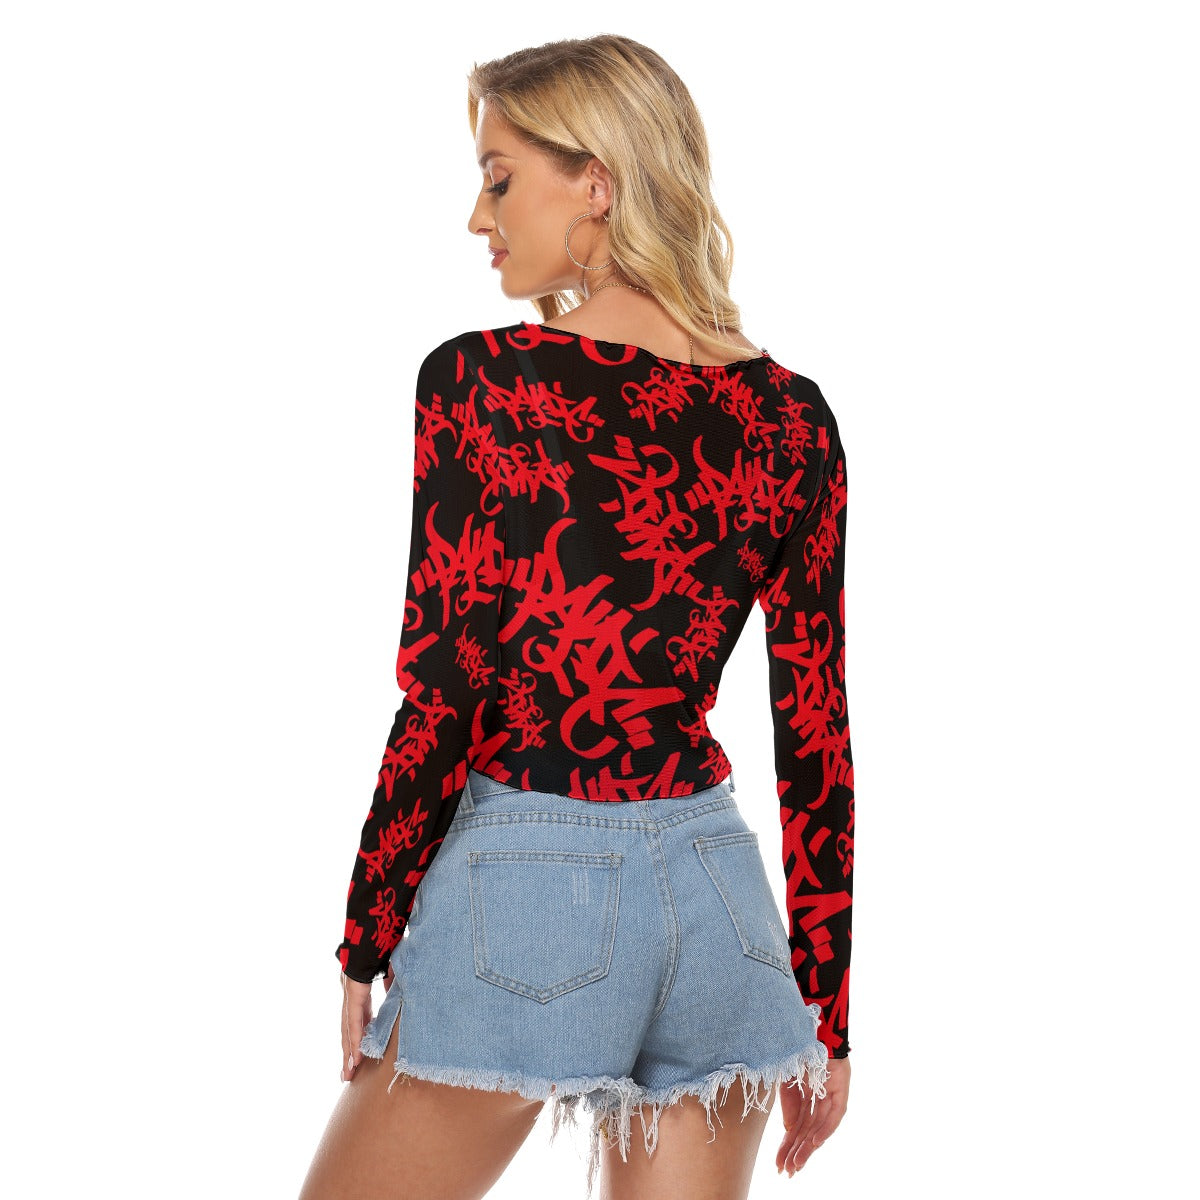 THE TAG MESH WOMENS CROP LONG SLEEVE TOP BLACK/RED - Panic 39